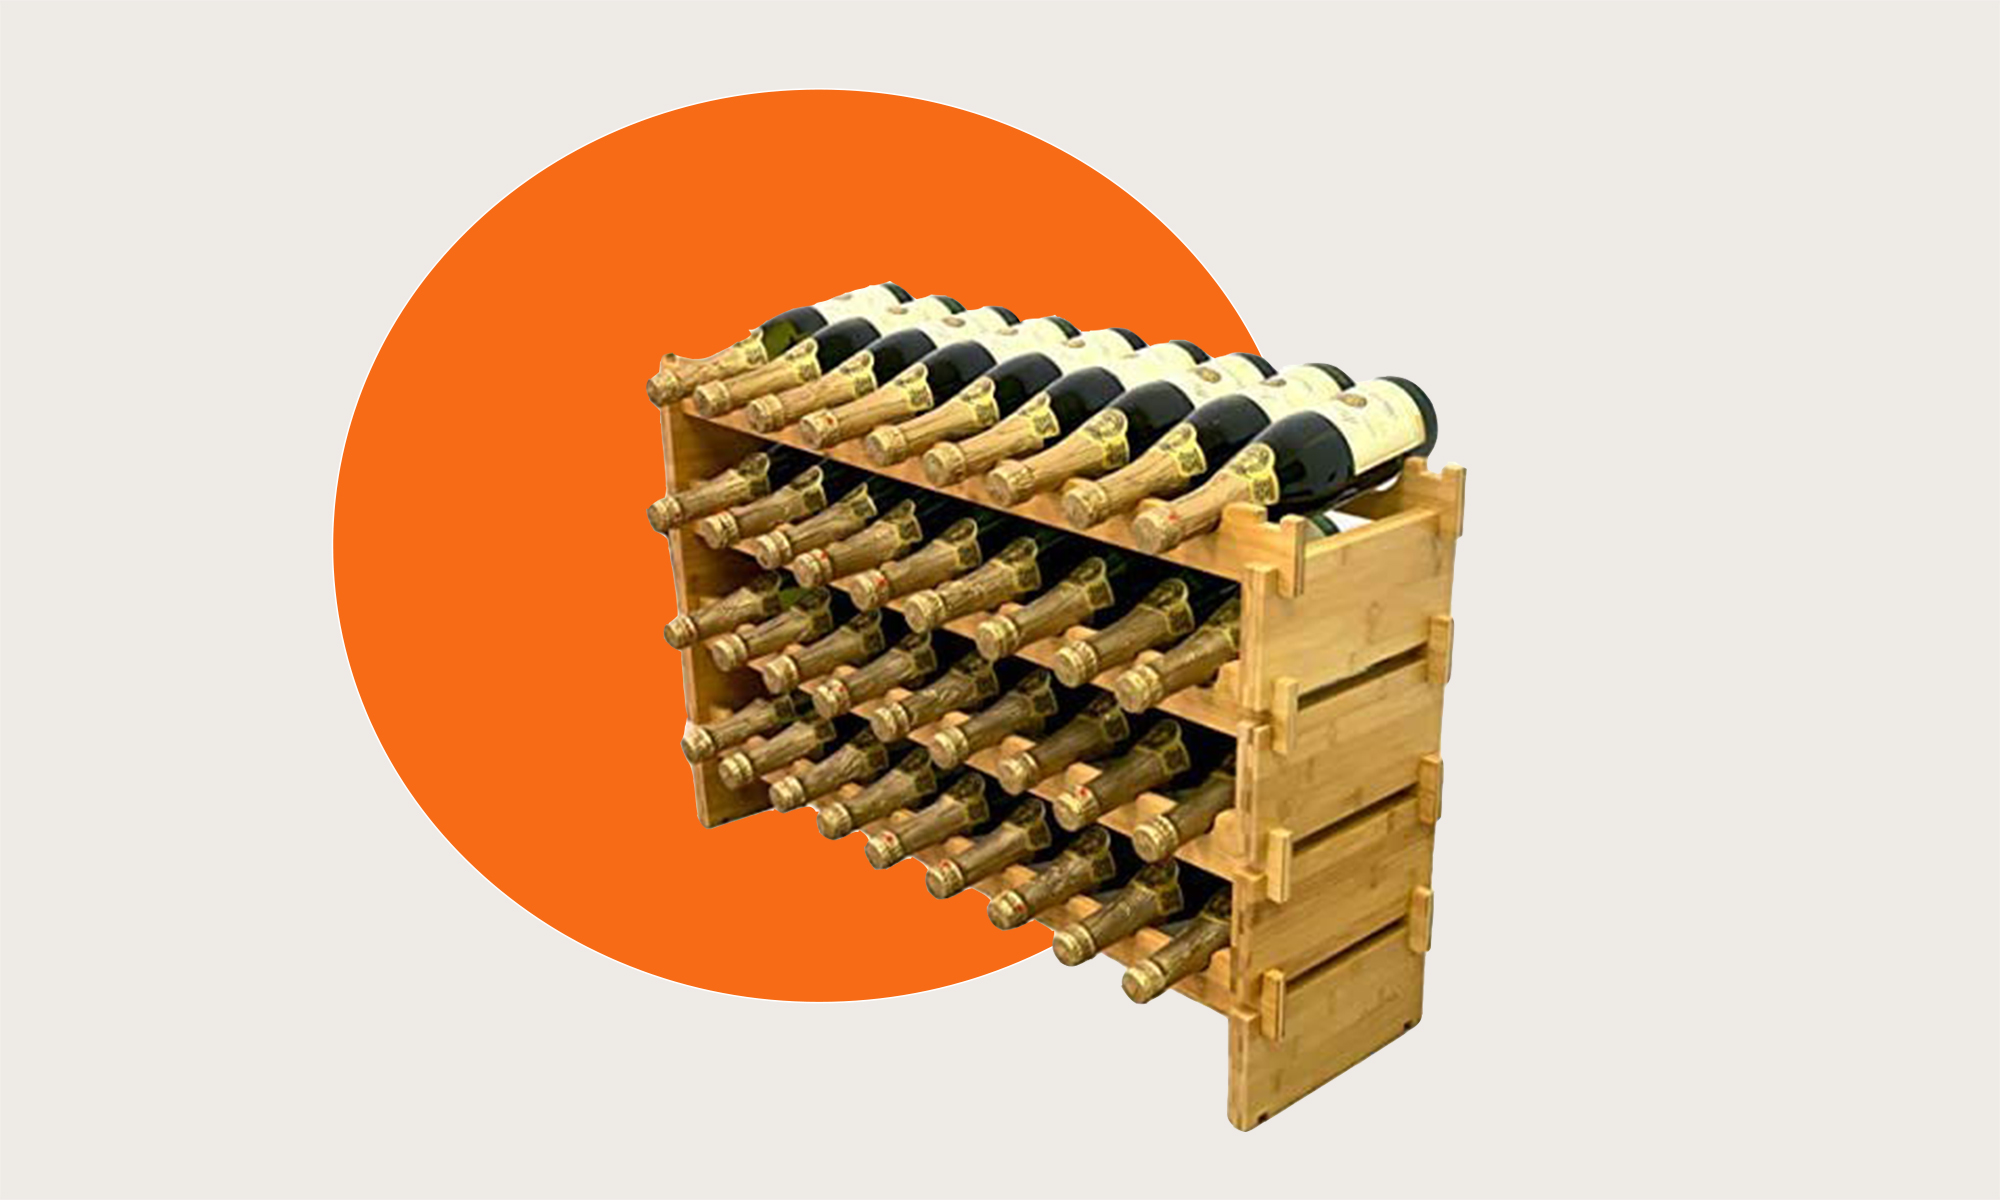 A wooden wine rack filled with Champagne bottles